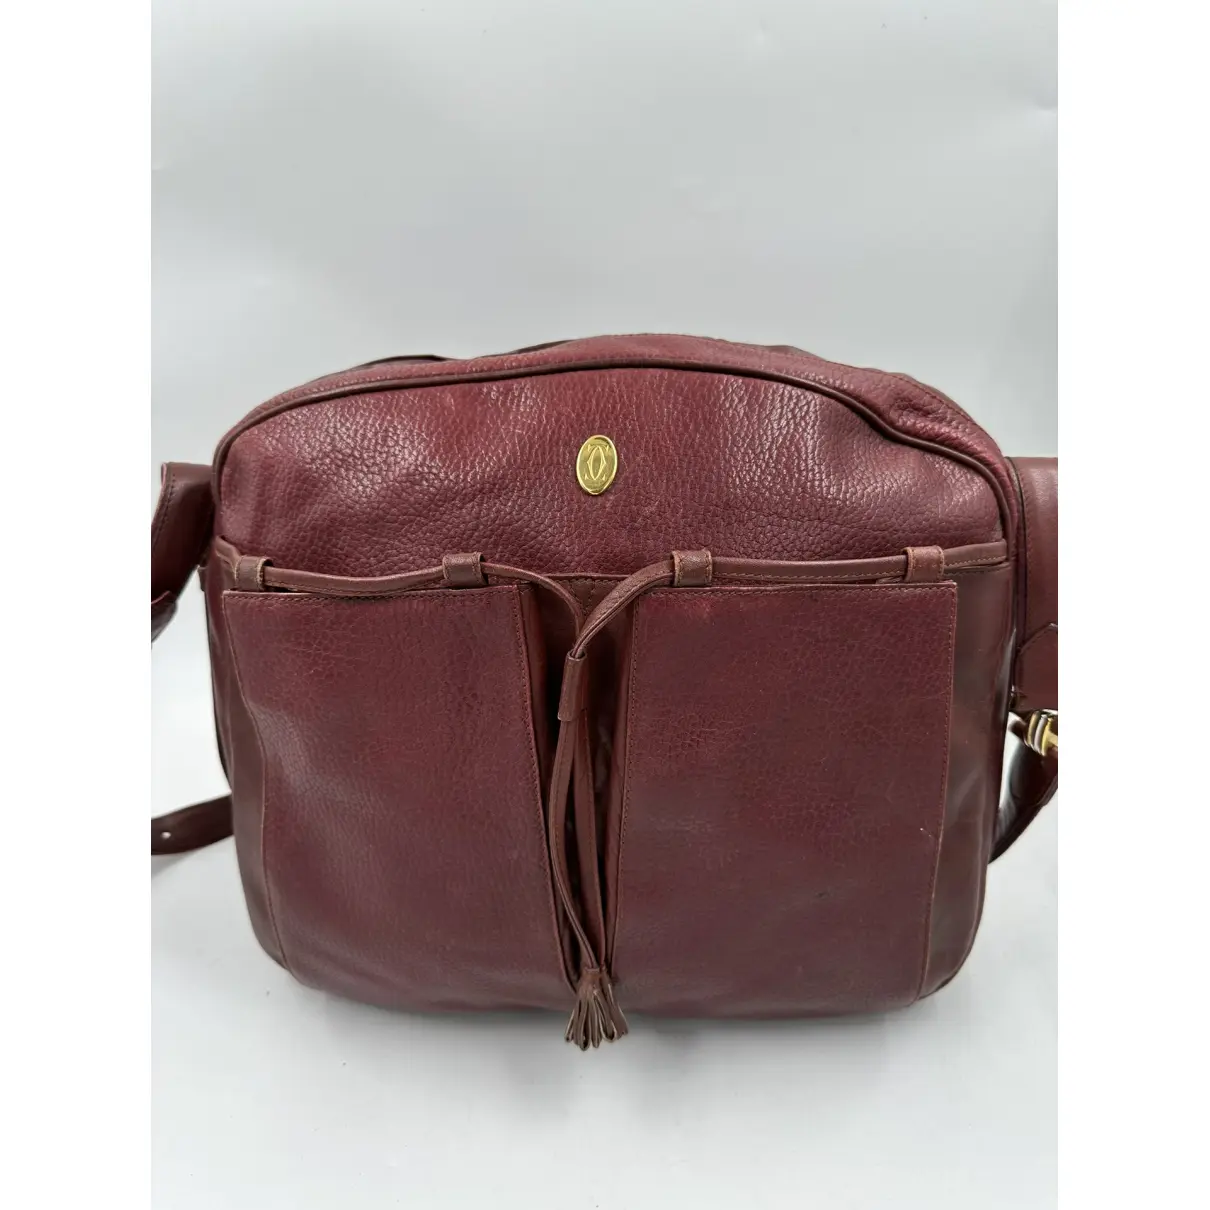 Buy Cartier Marcello leather crossbody bag online